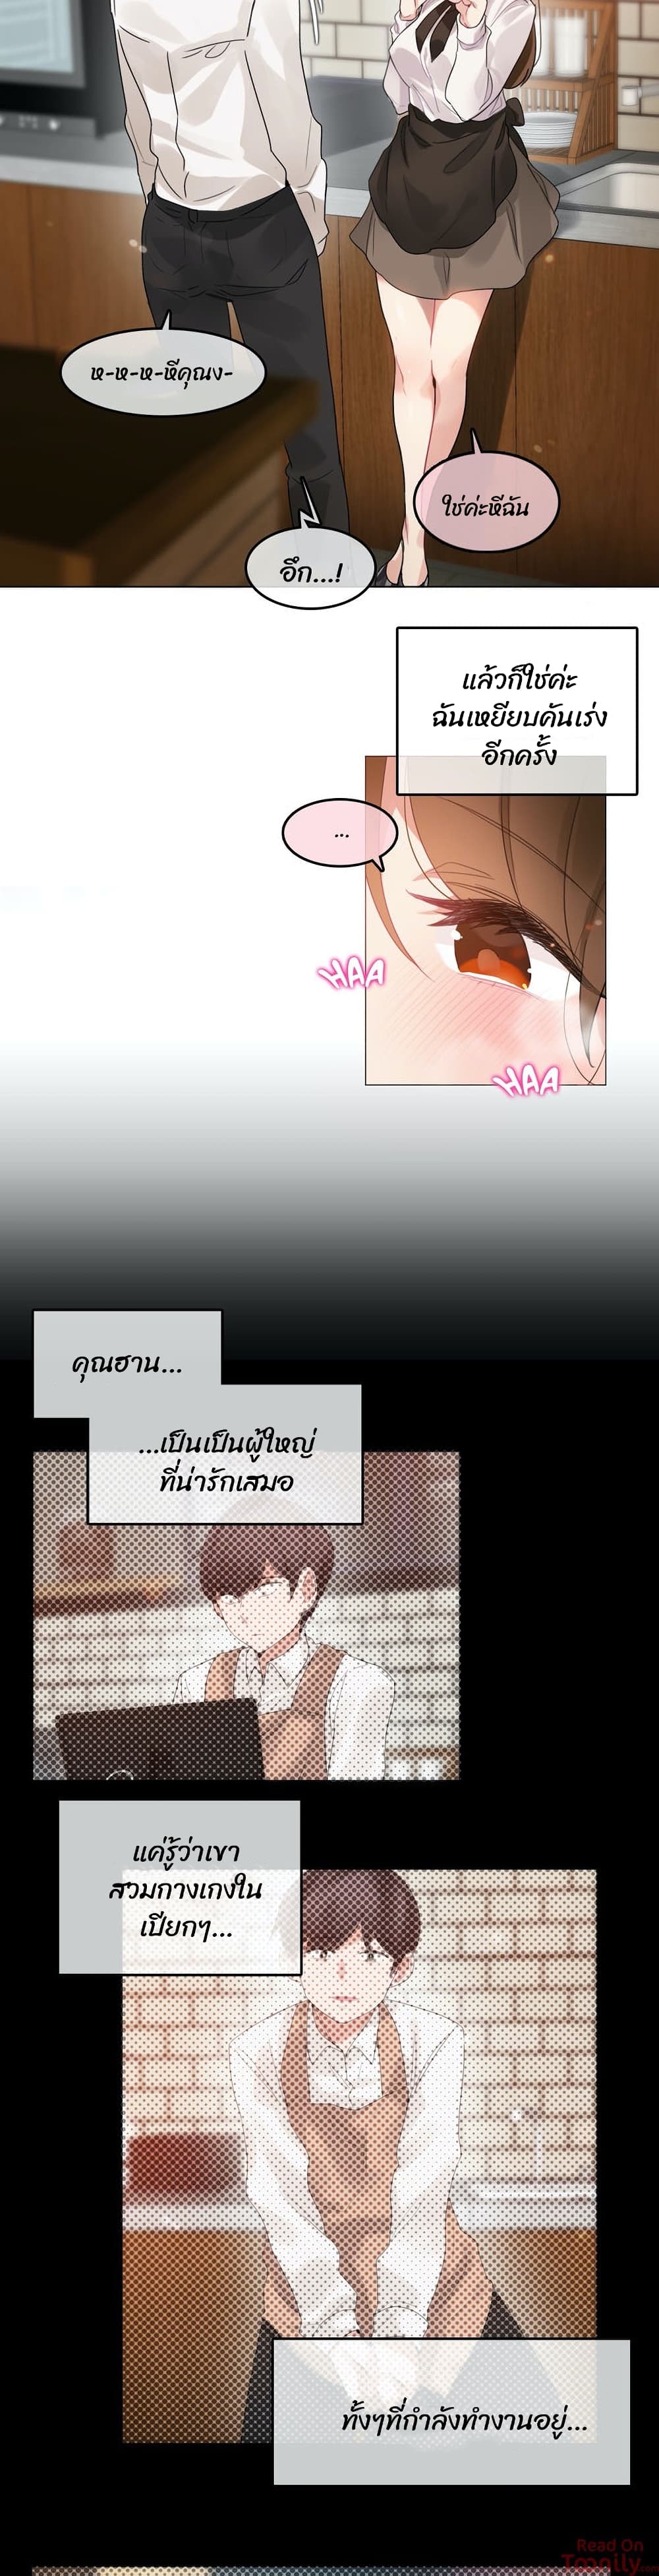 A Pervert's Daily Life 85 (2)